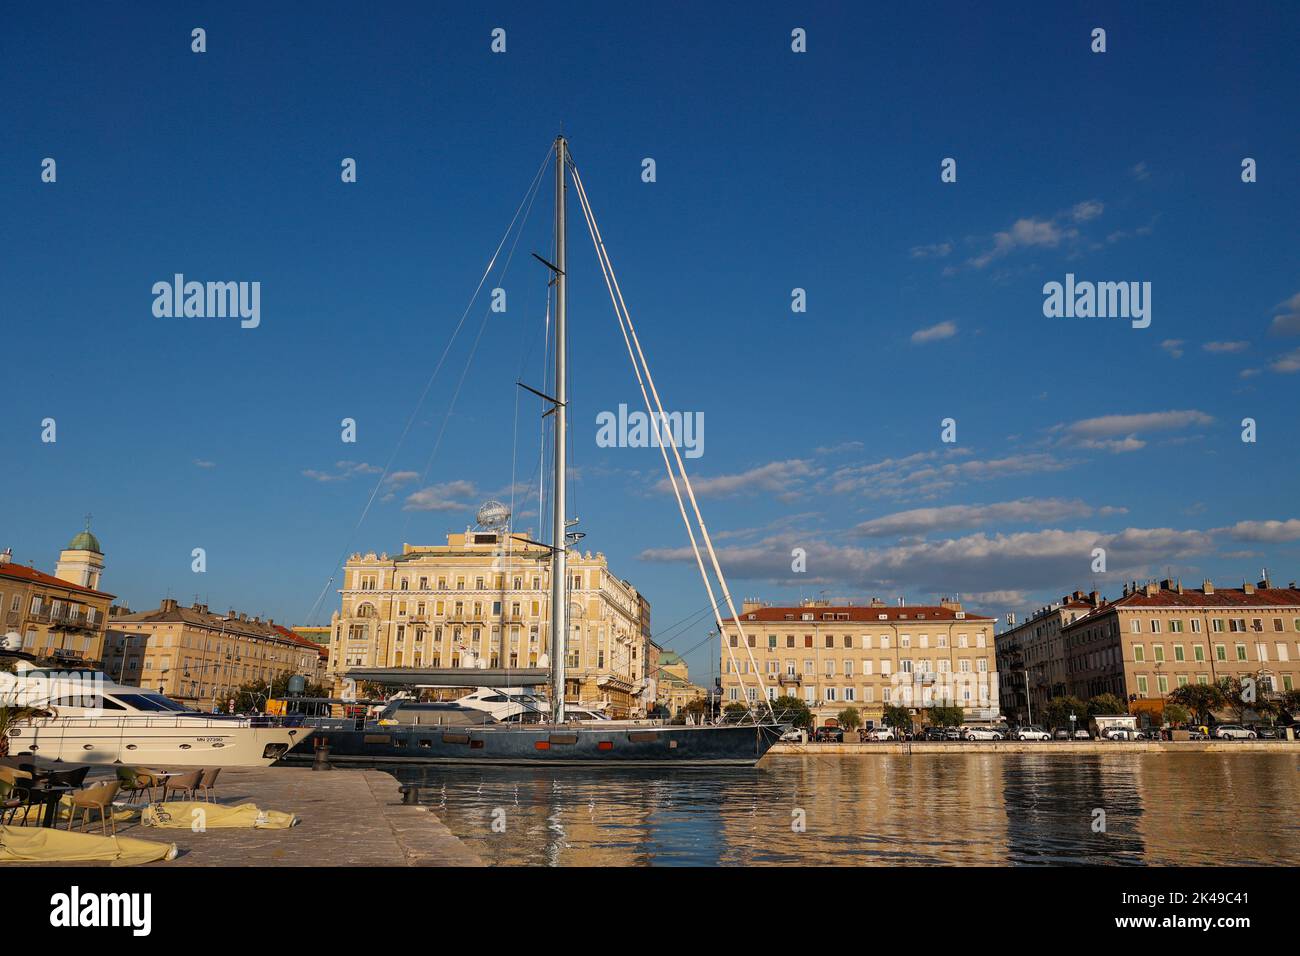 View of yachts anchored in the harbour with Palazzo Bacich,  today the Transadria building, in the background, Rijeka,Istria,Croatia Stock Photo